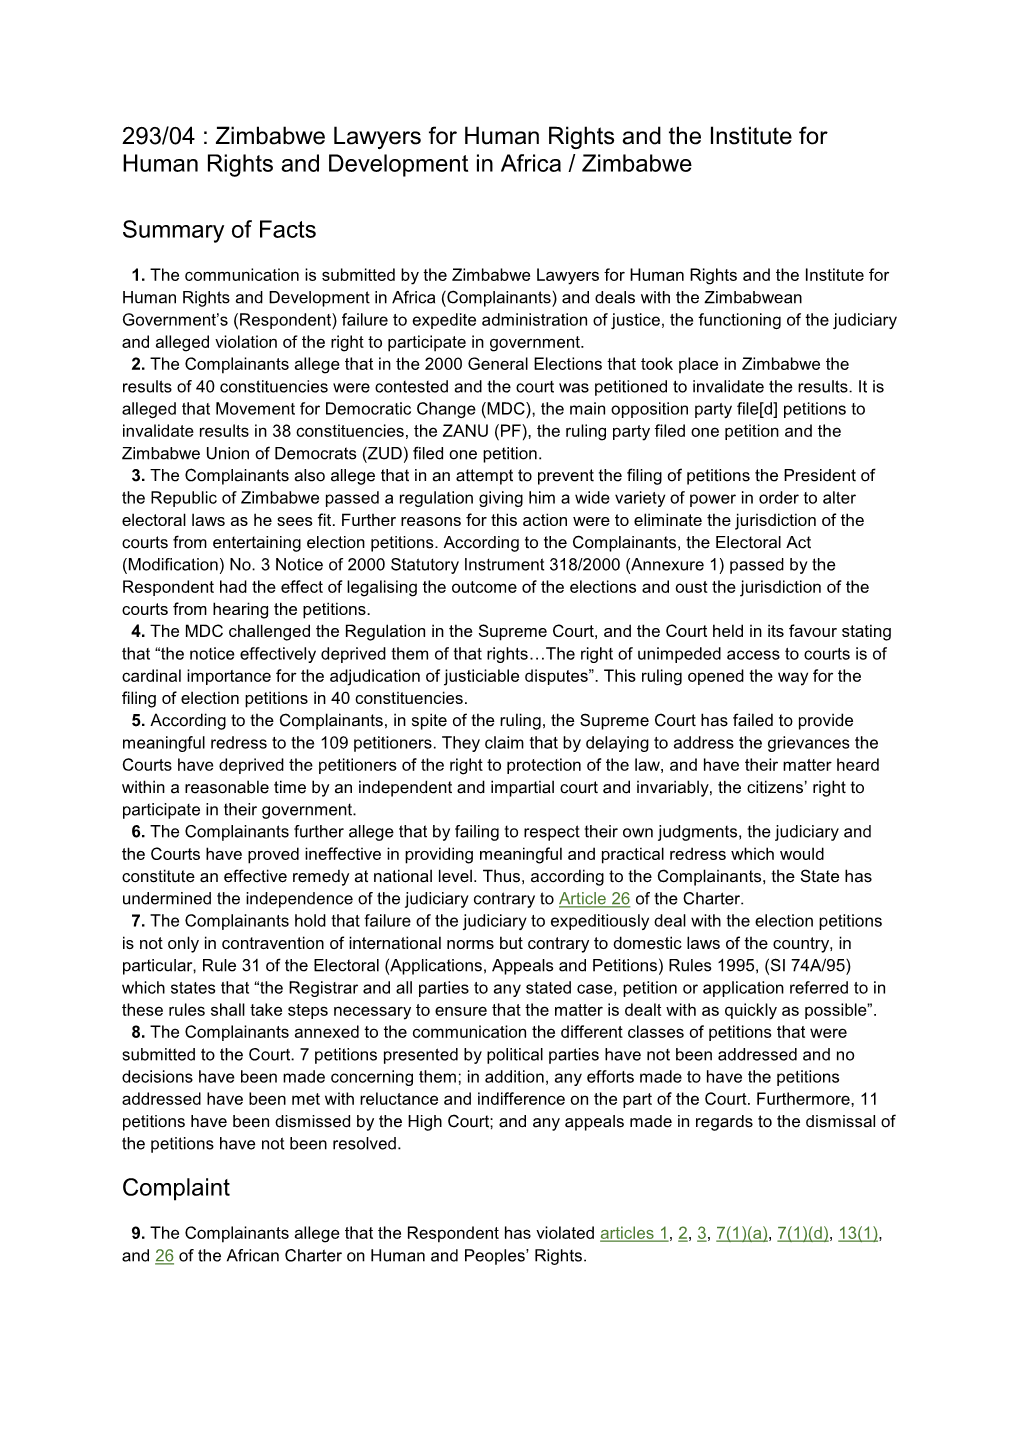 293/04 : Zimbabwe Lawyers for Human Rights and the Institute for Human Rights and Development in Africa / Zimbabwe Summary of Fa